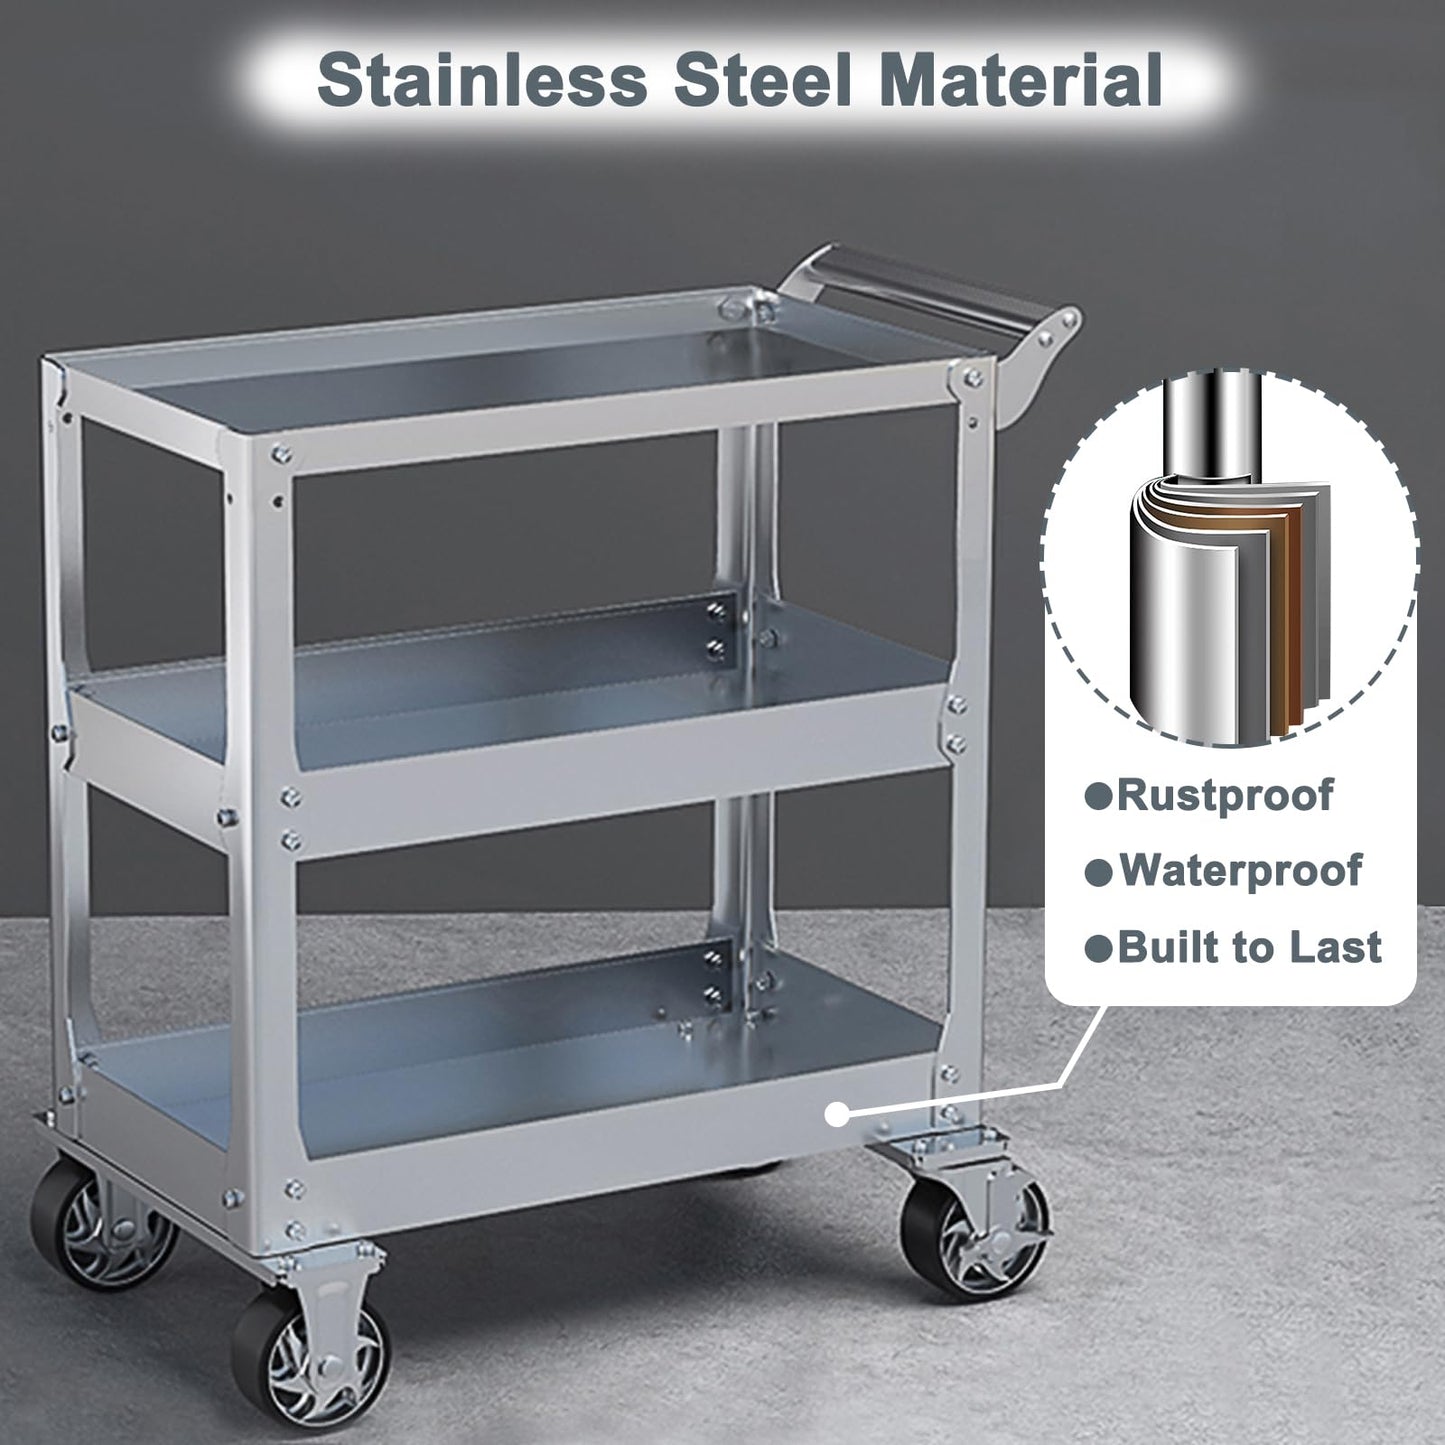 3-Tier Stainless Steel Utility Cart, 1100 lbs Heavy Duty Service Cart with Wheels, Rolling Tool Cart on Wheels, Work Cart for Mechanic, Garage,